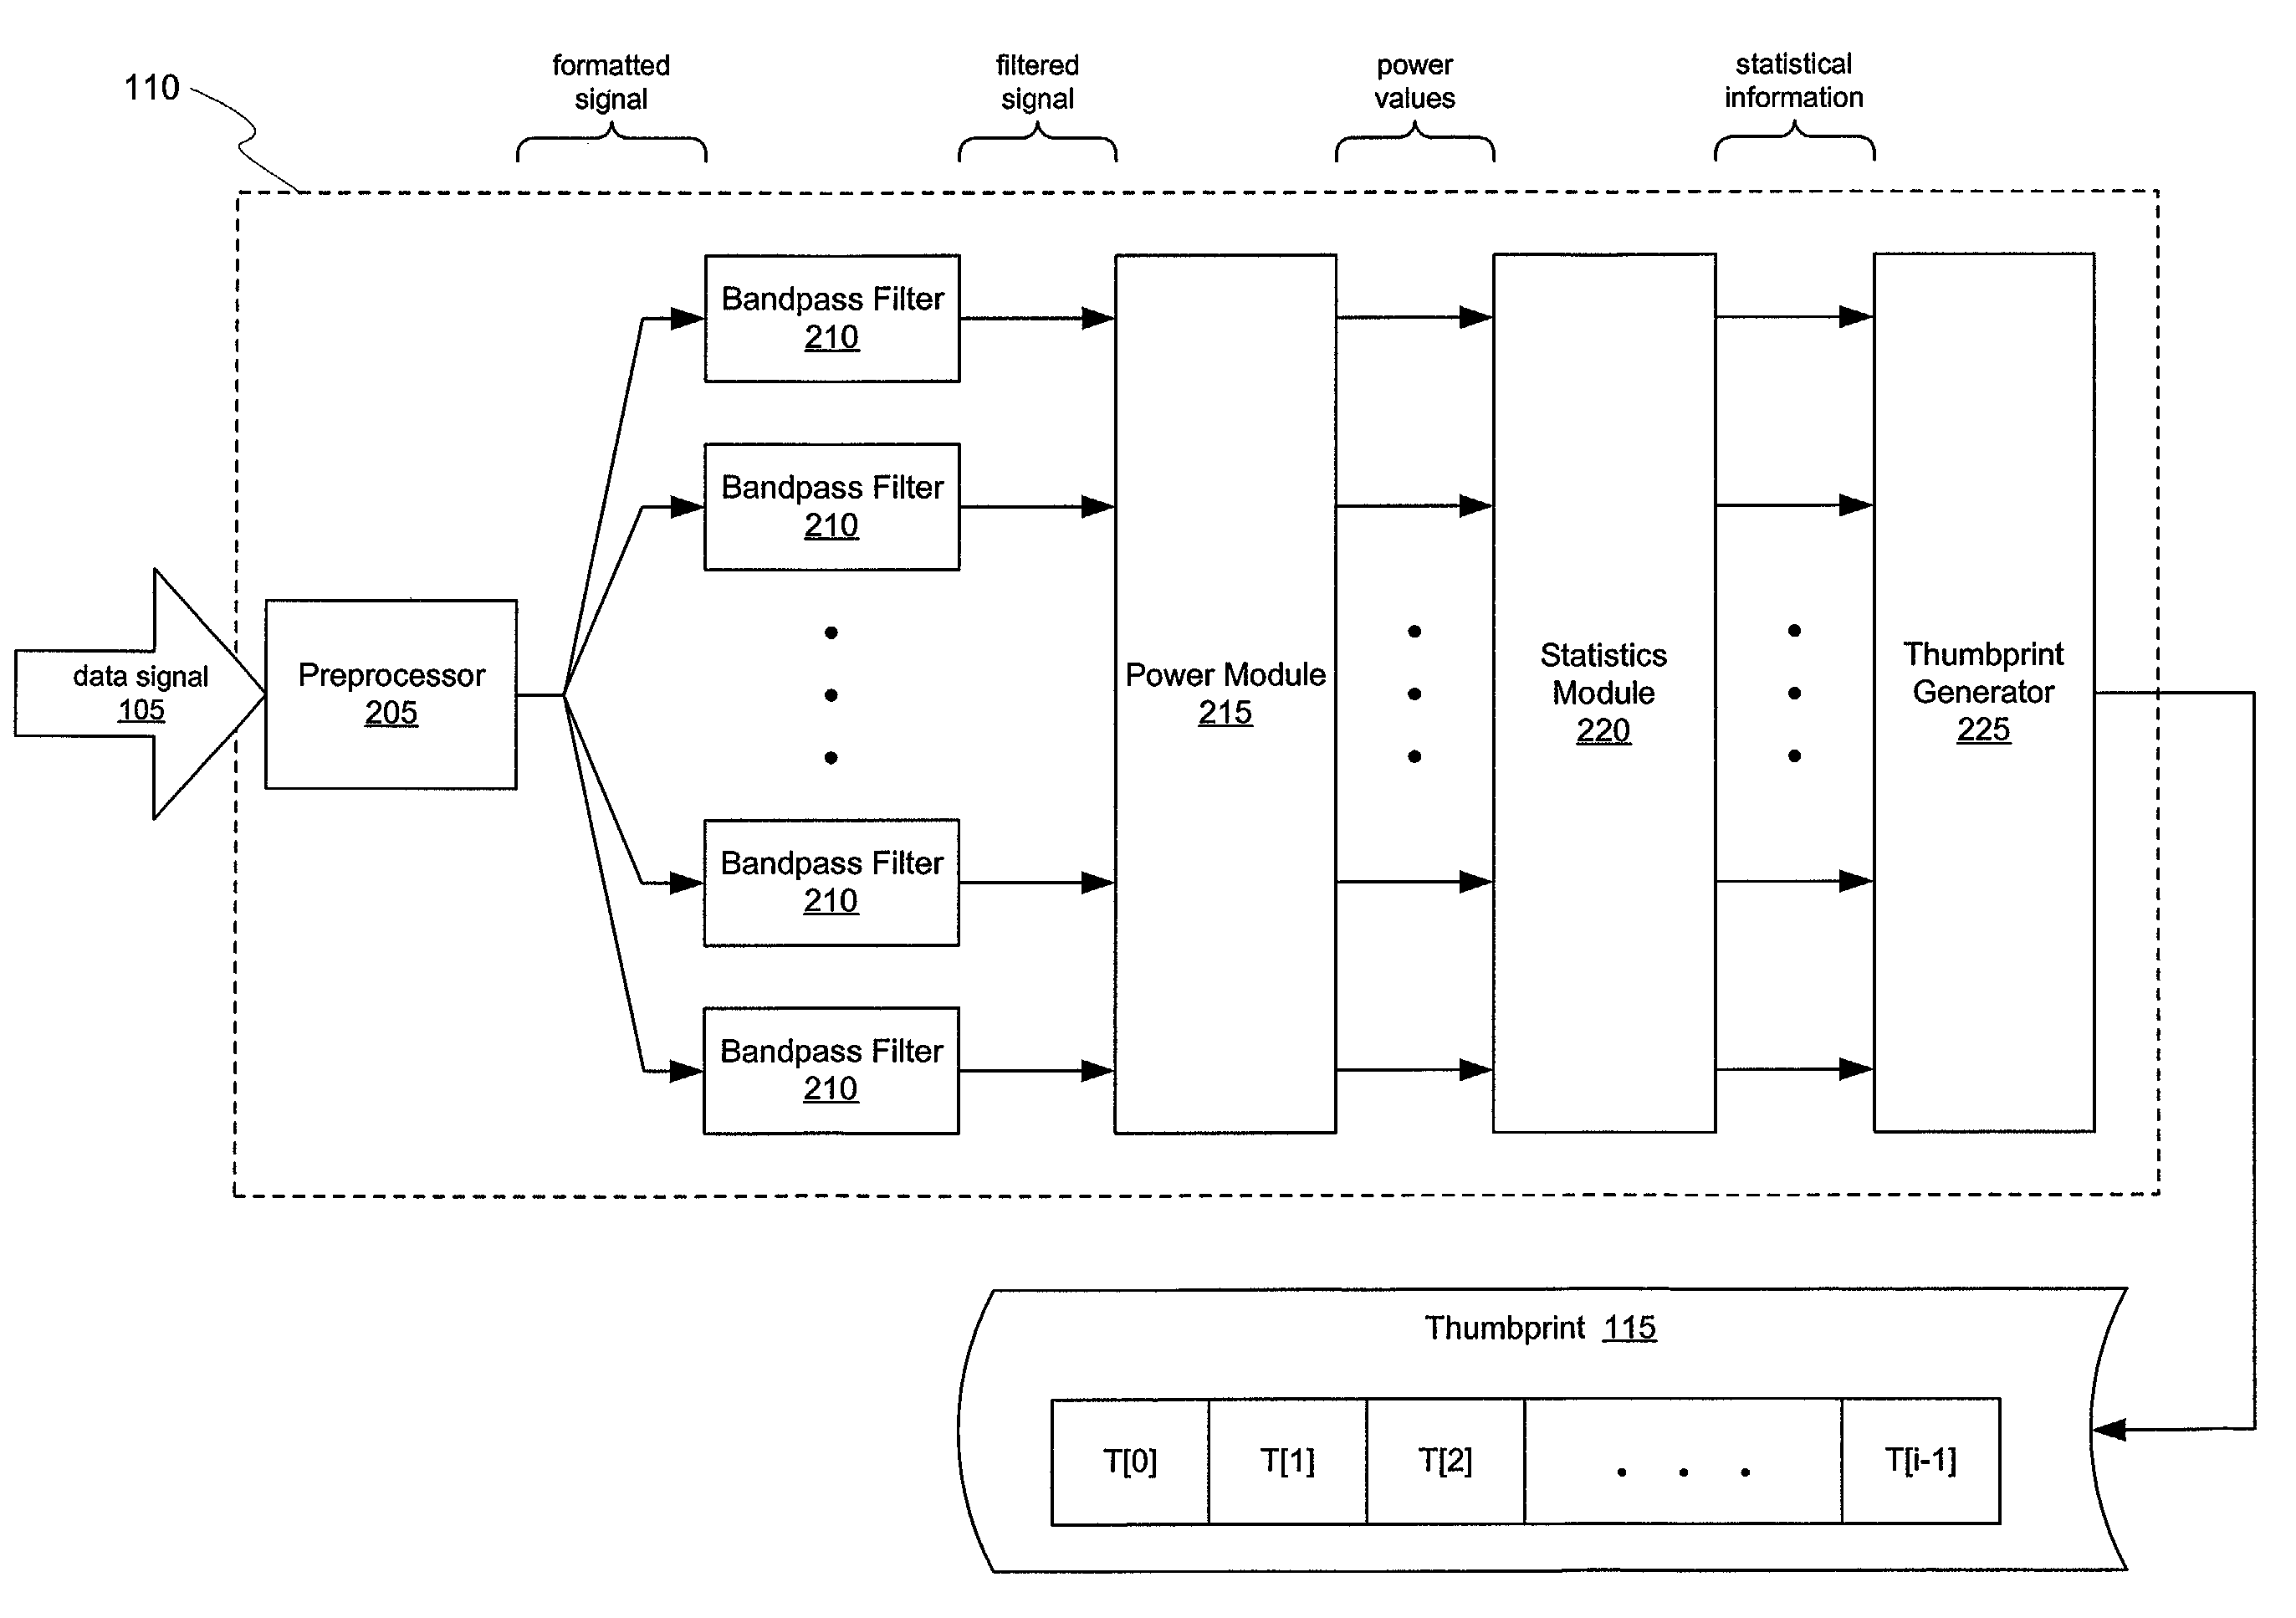 Comparison of data signals using characteristic electronic thumbprints